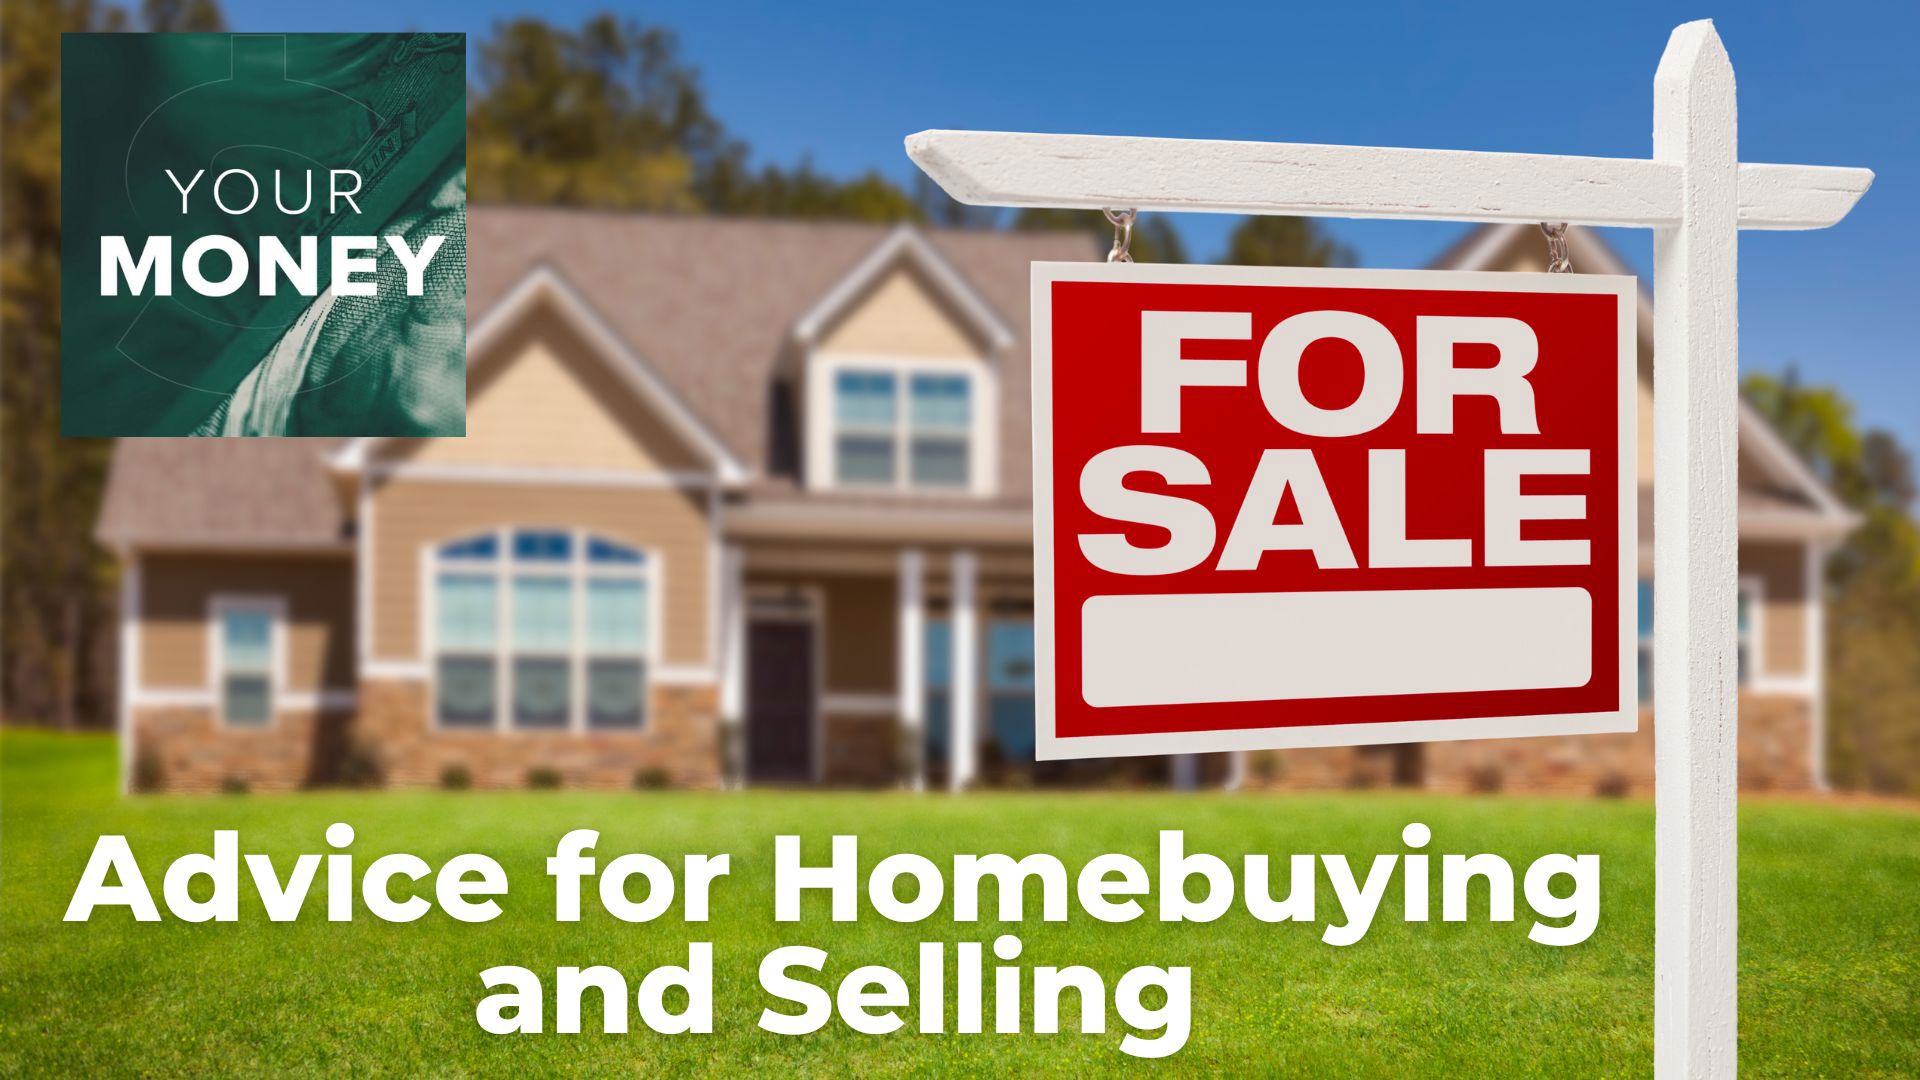 Gordon Severson looks into the market for homebuying and selling. Advice for first time homebuyers, the impact of the realtors lawsuit settlement and more.